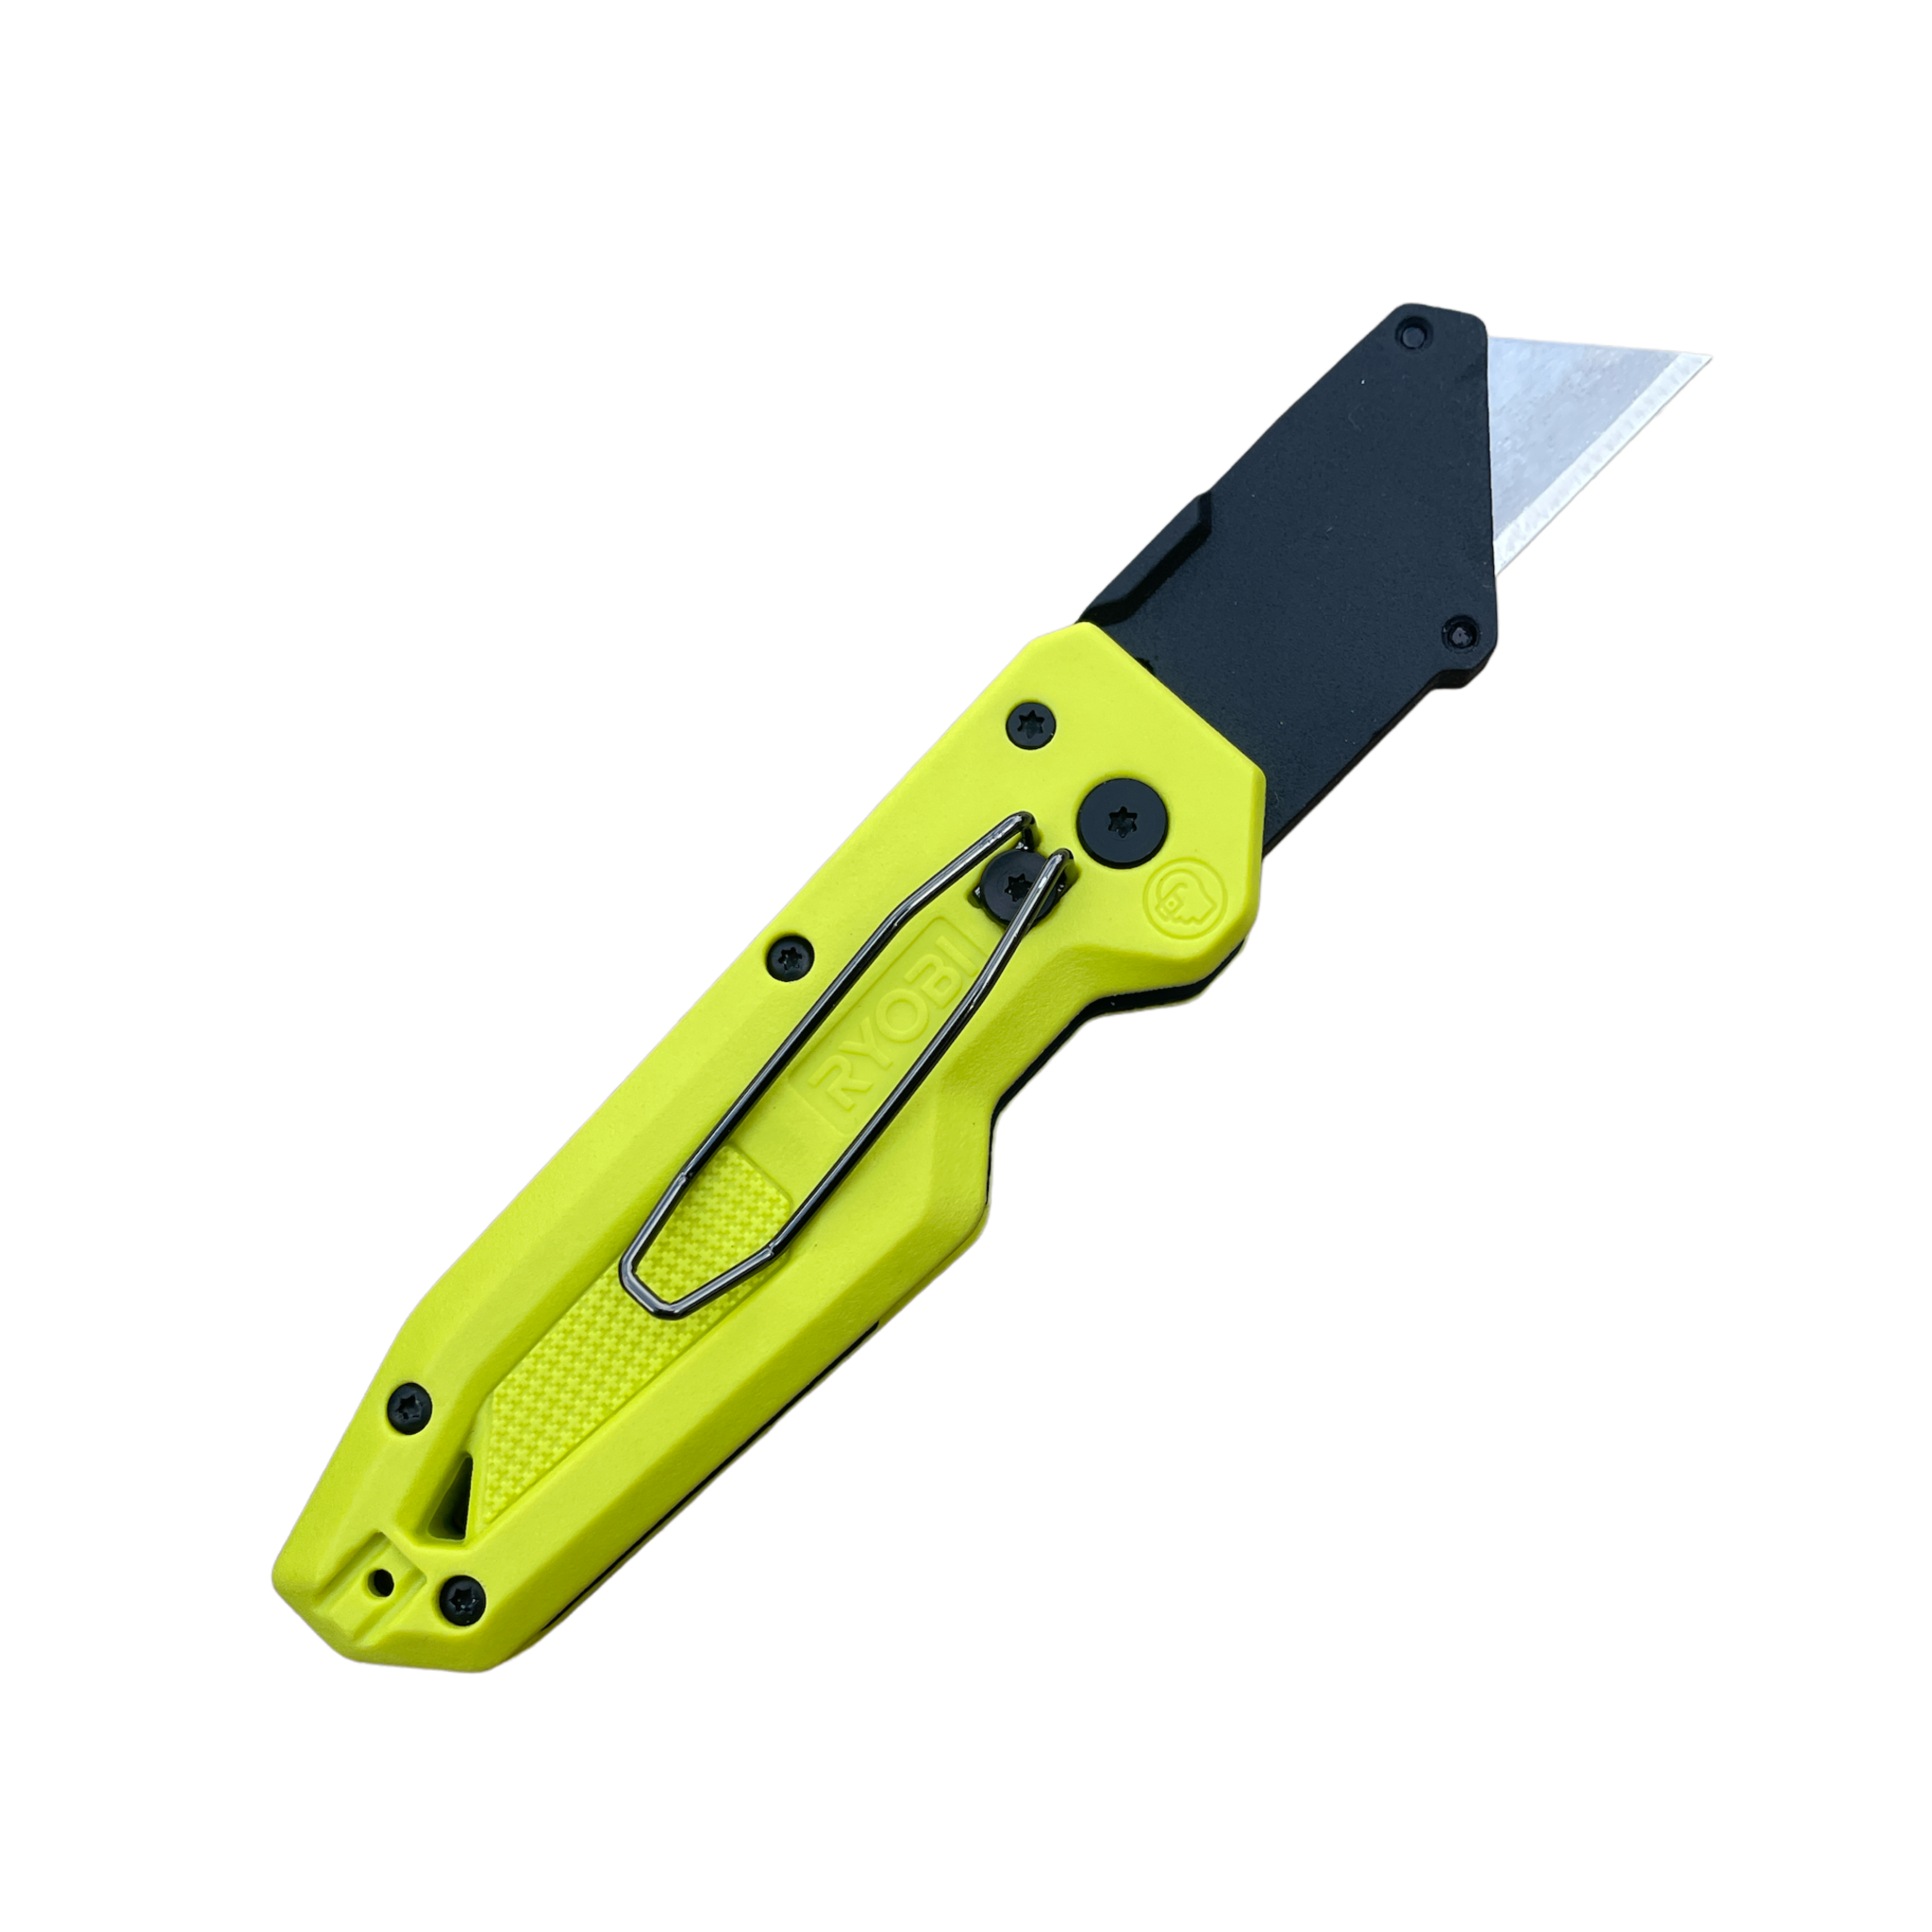 Hart Compact Folding Utility Knife with Removable Belt Clip - 1 Each